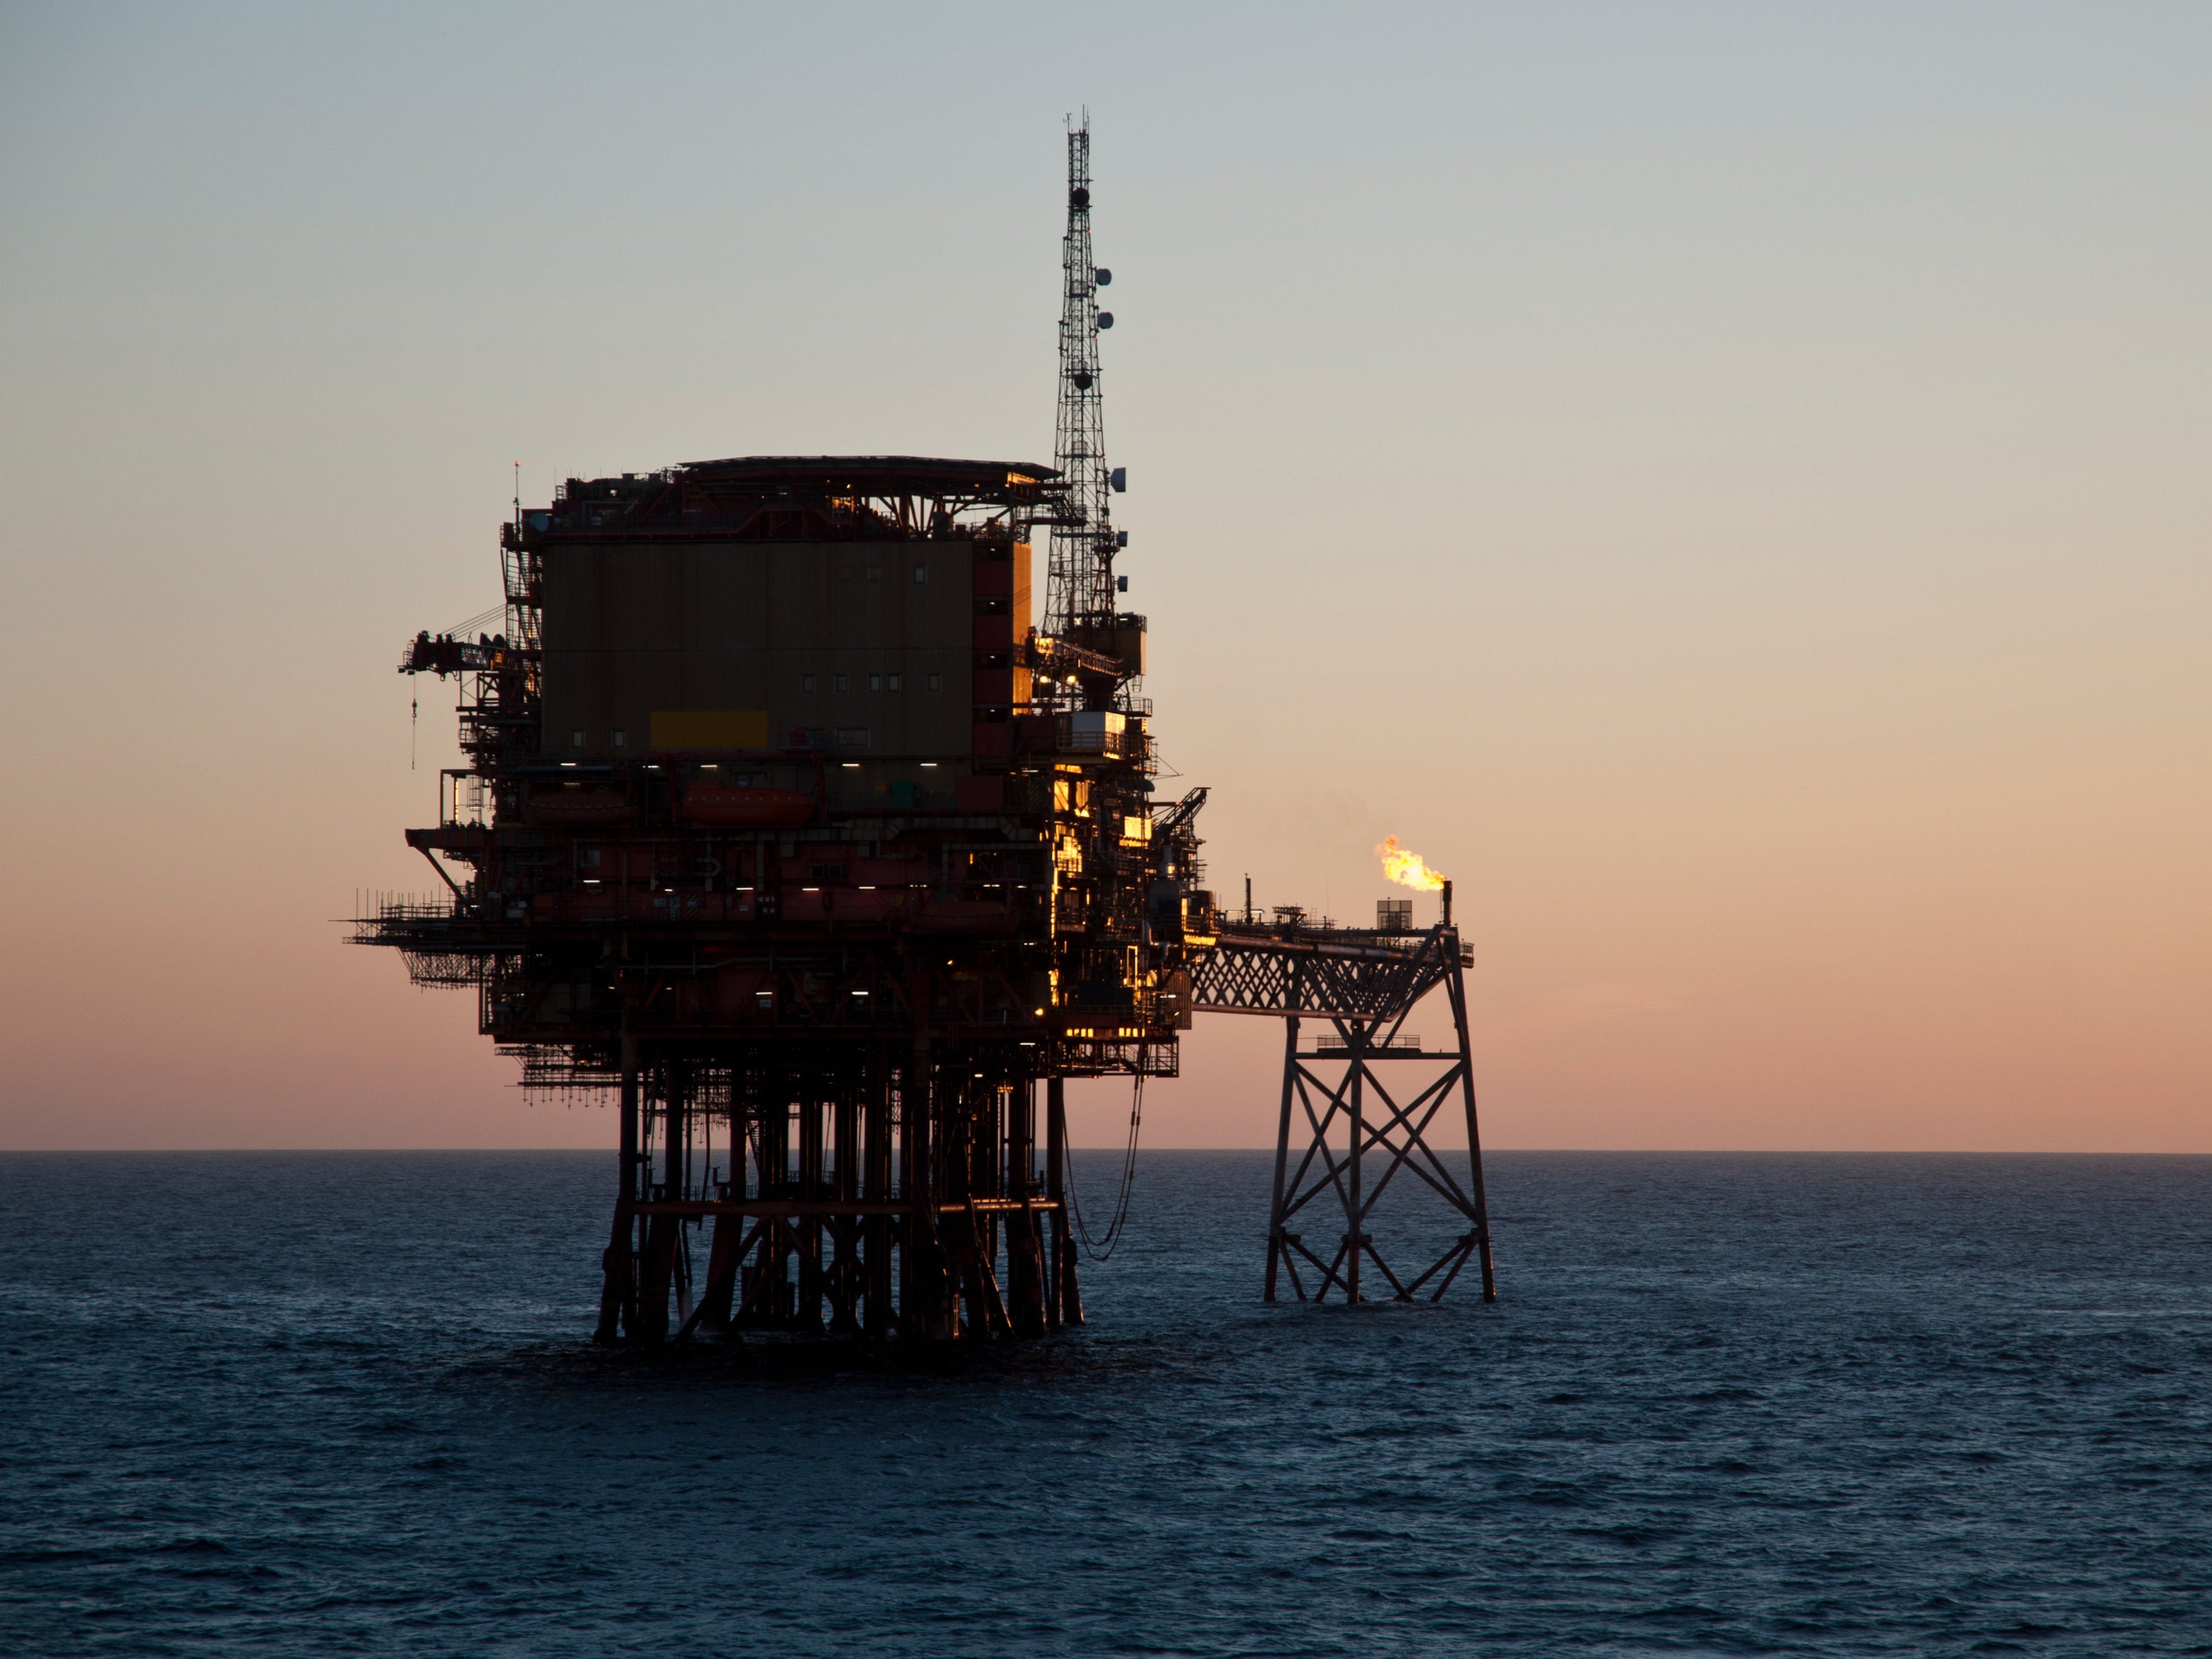 Ministers claim support for the oil and gas industry will not derail net zero ambitions